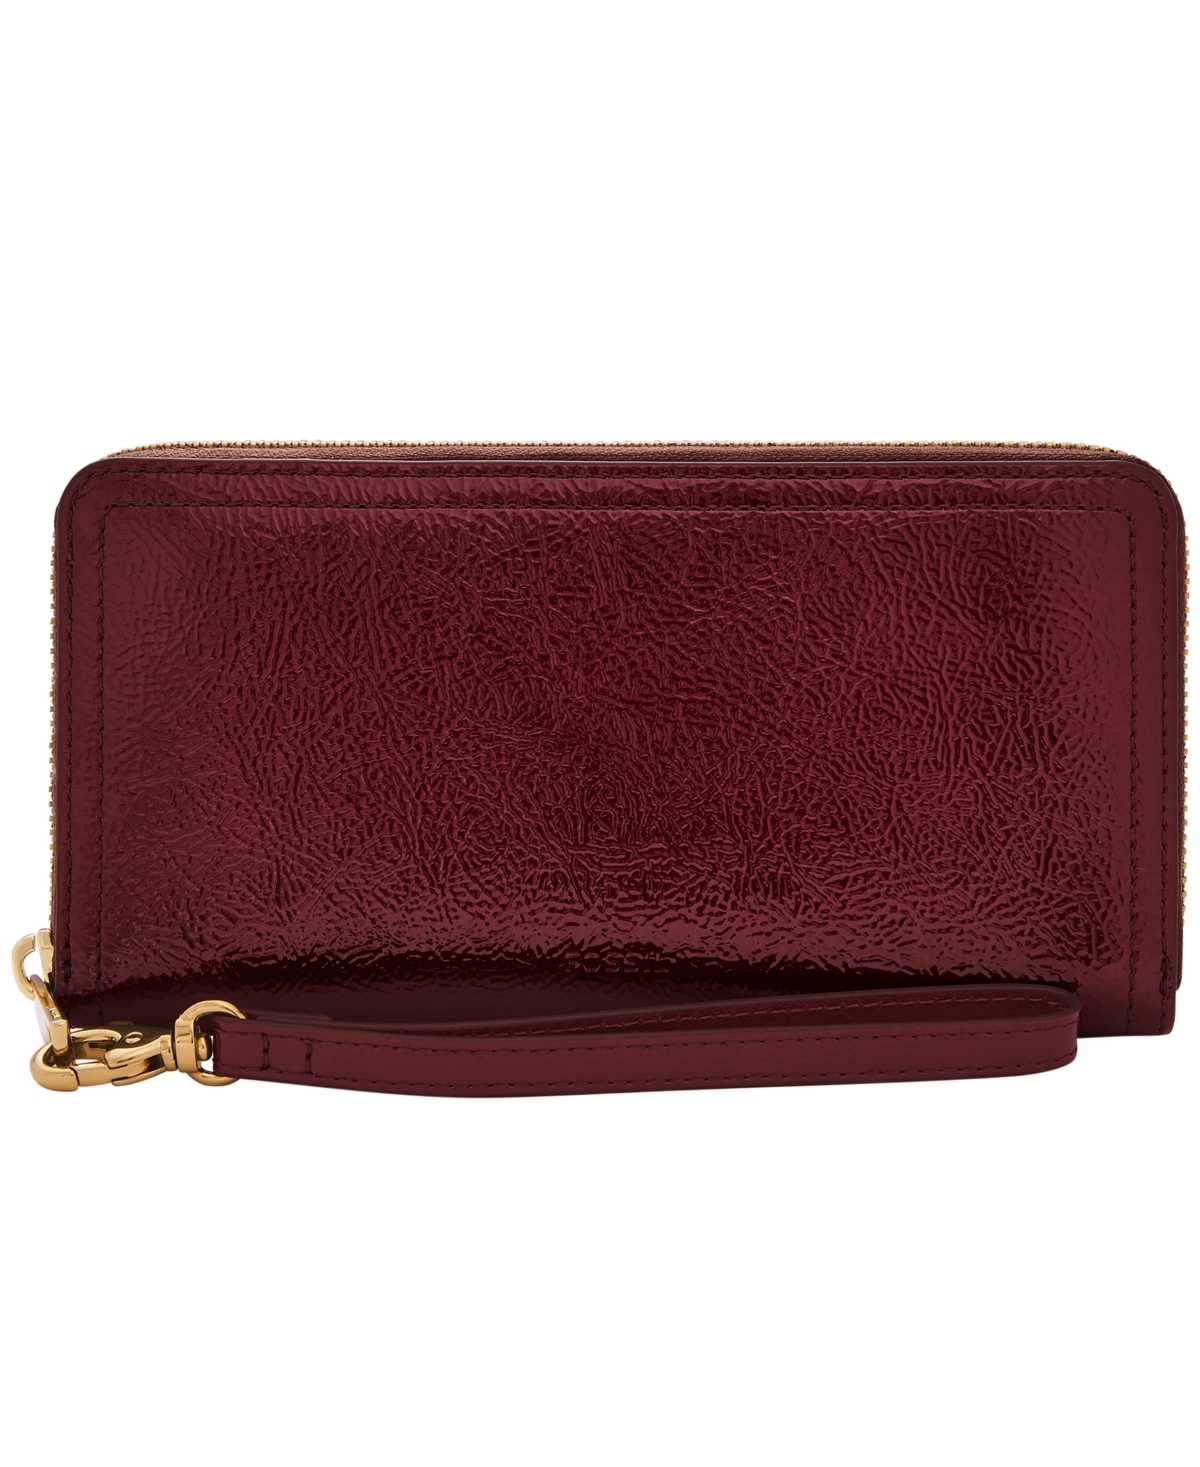 Fossil Logan Zip Around Clutch Wallet In Red Mahogany